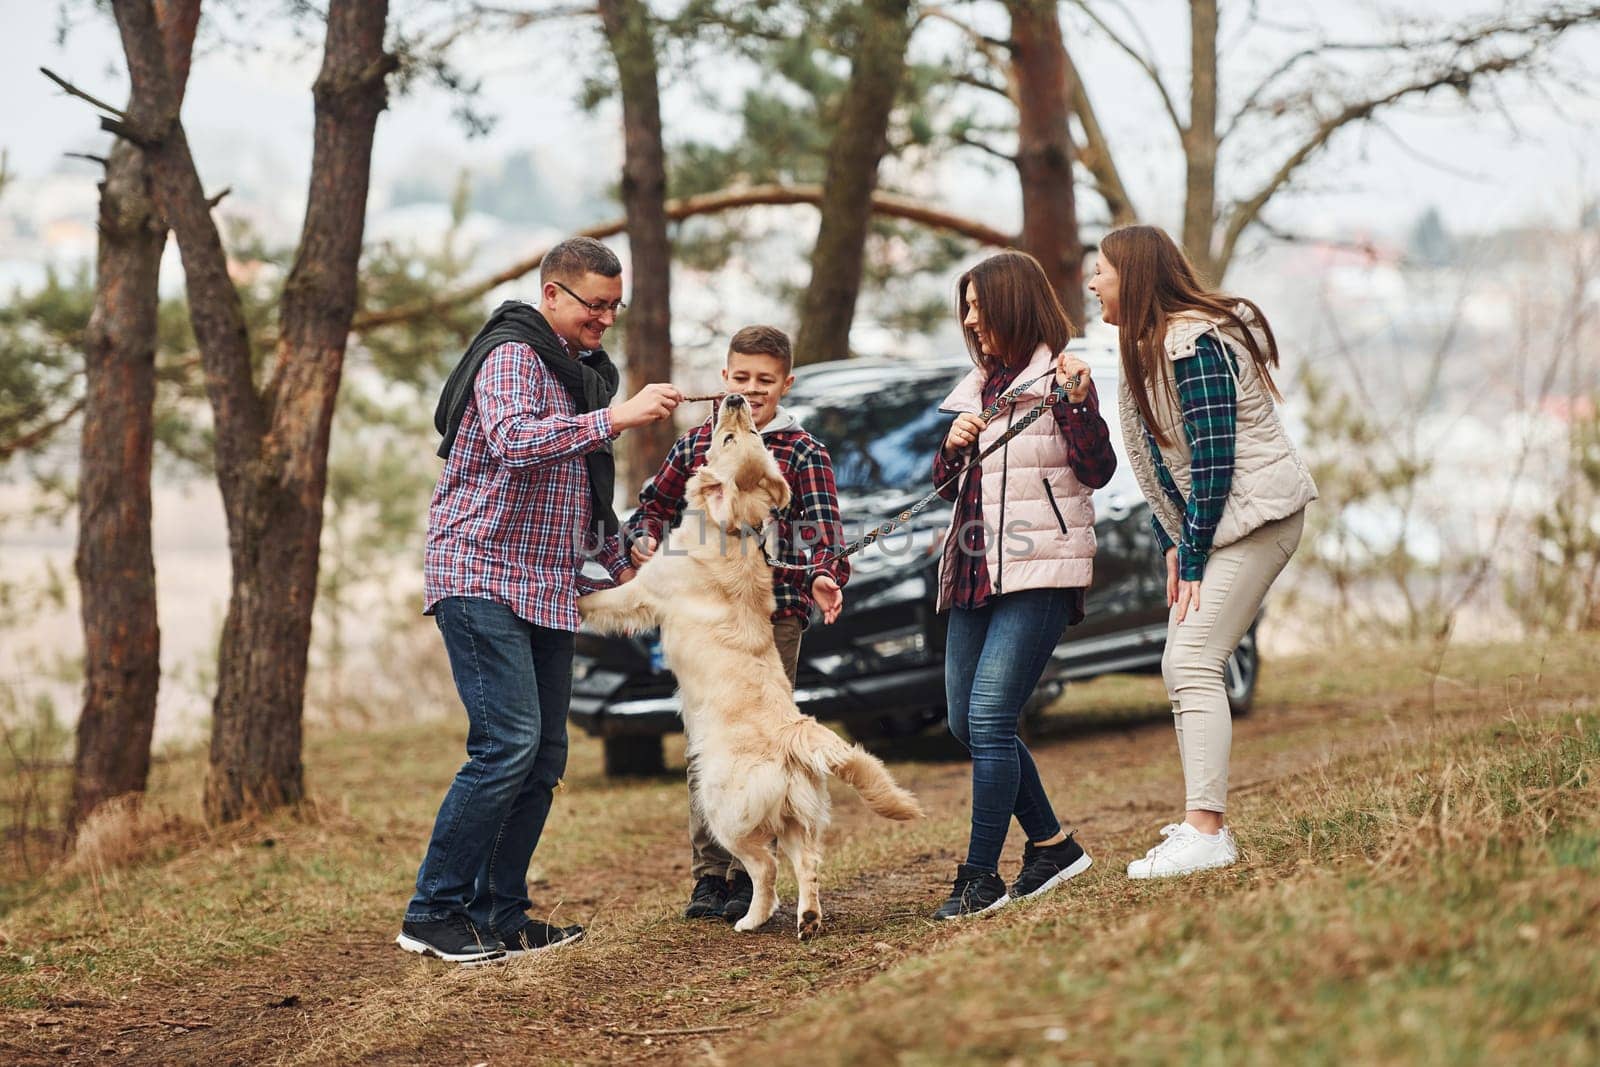 Happy family have fun with their active dog near modern car outdoors in forest by Standret